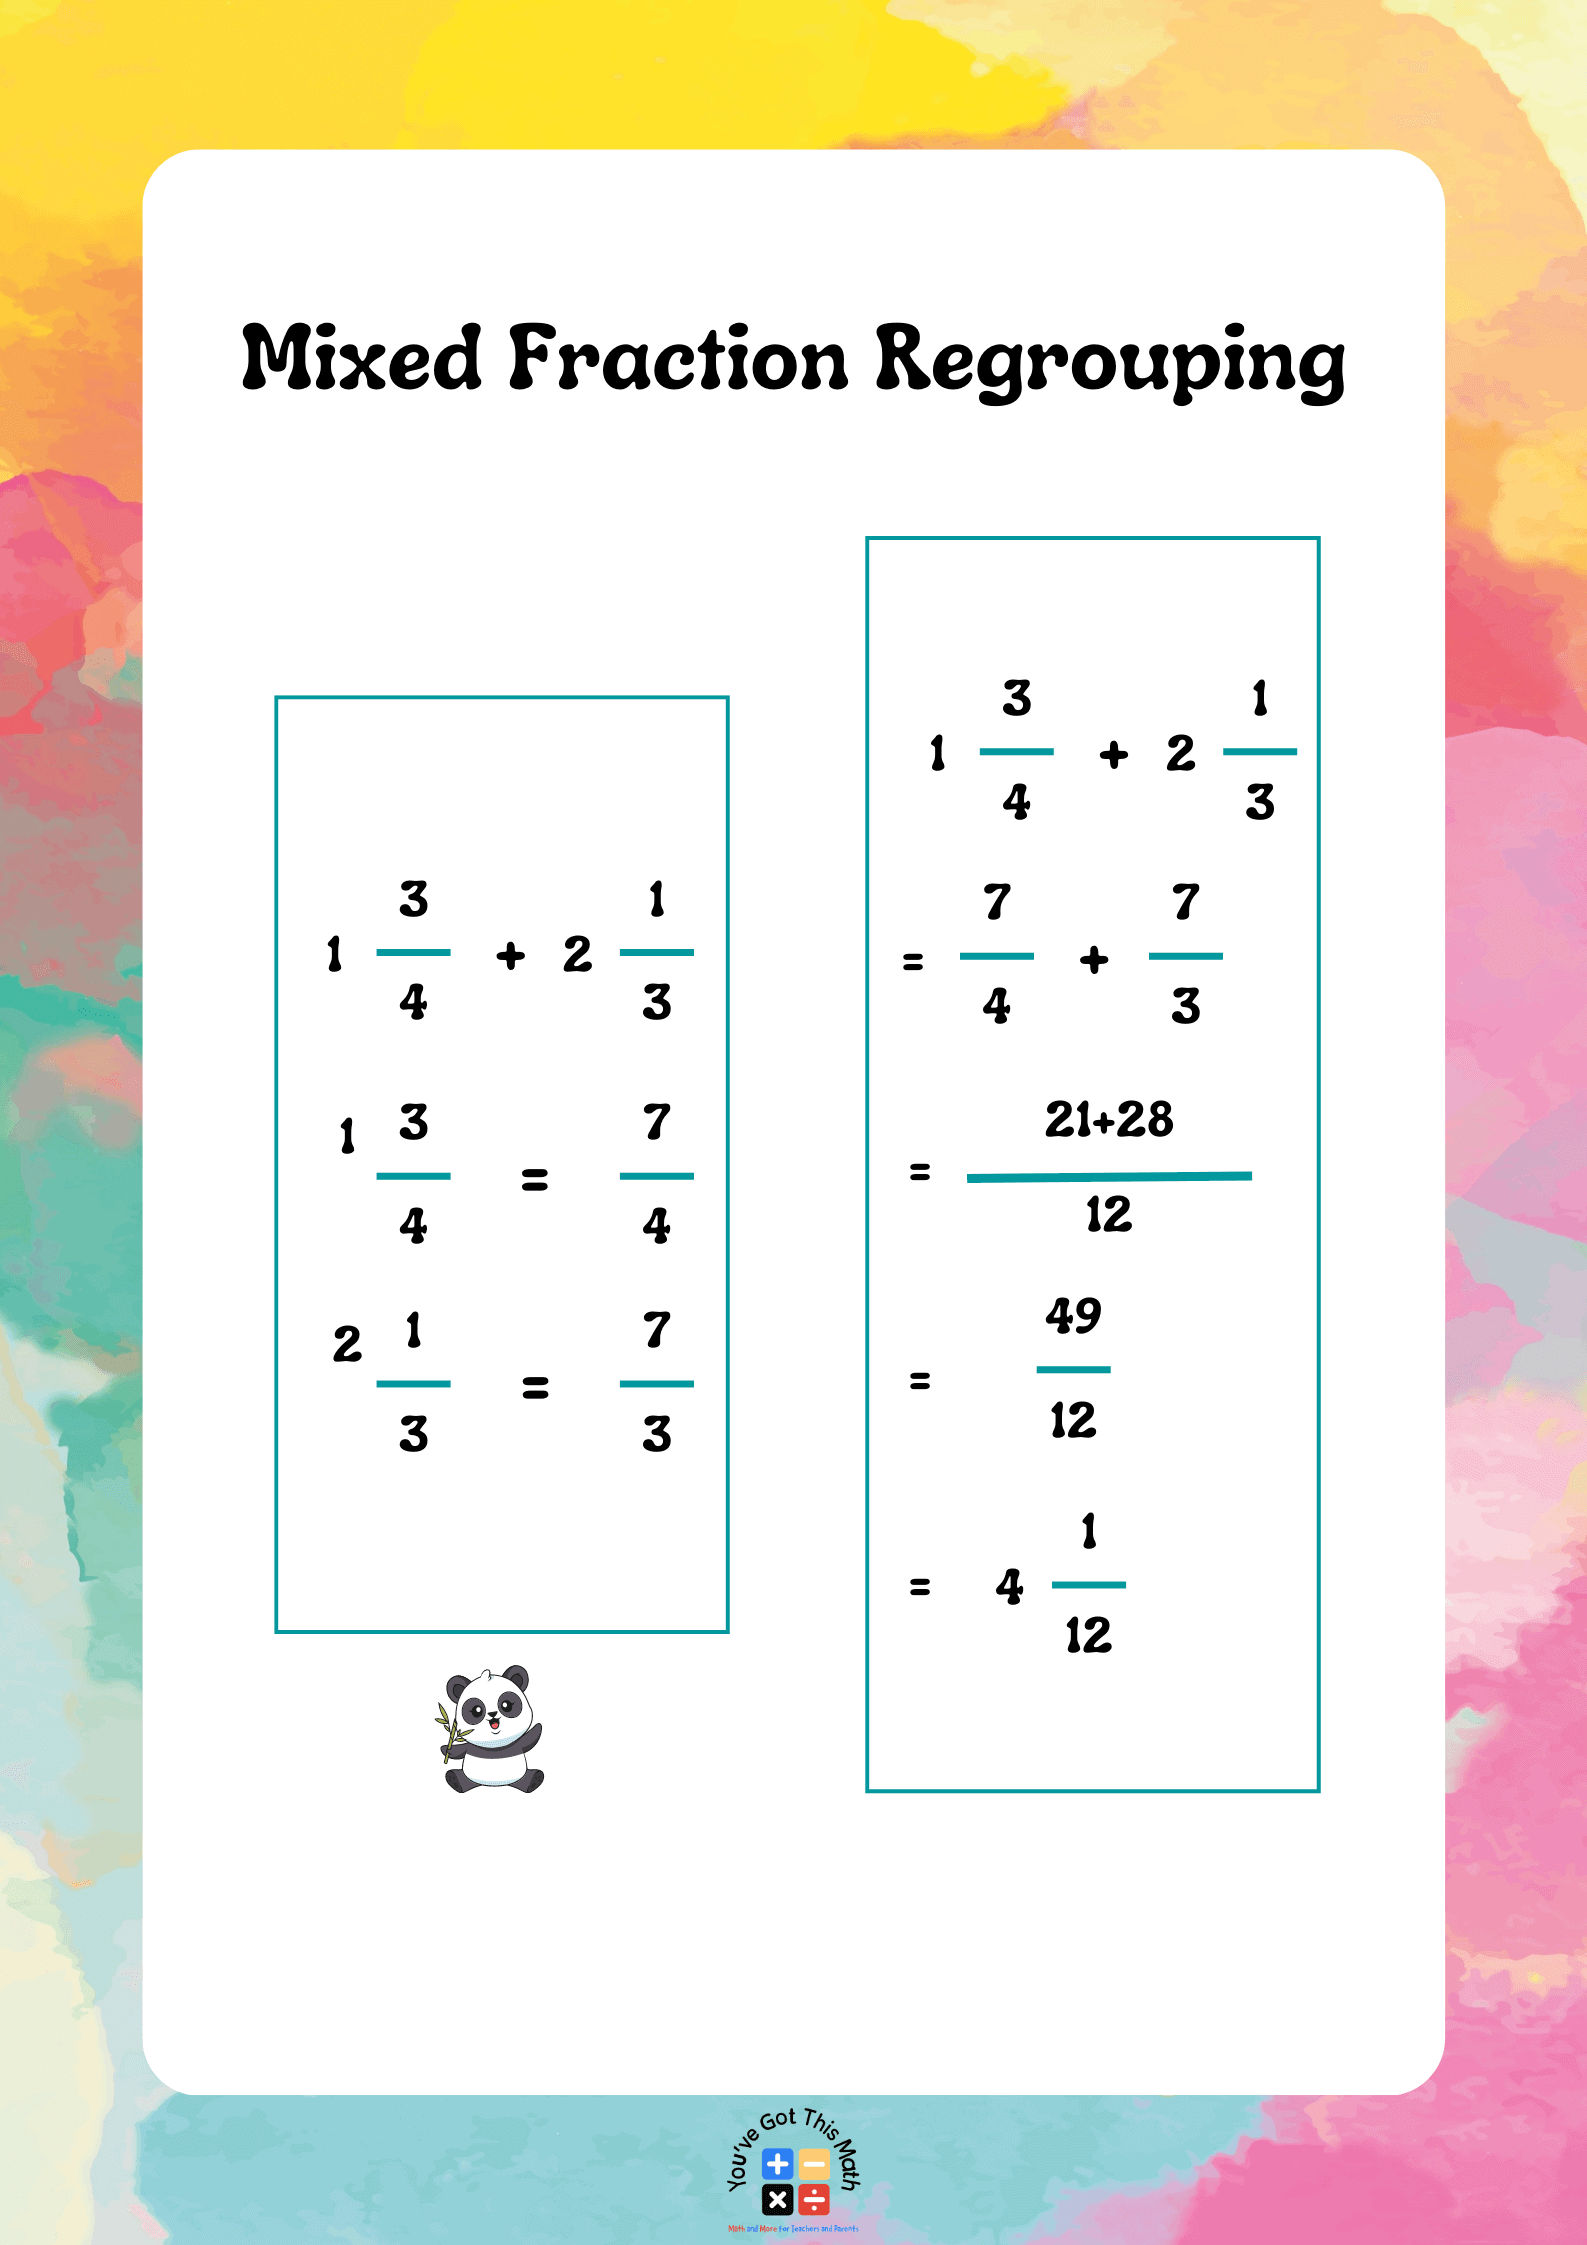 Mixed Fraction Regrouping for adding and subtracting fractions wit regrouping worksheets